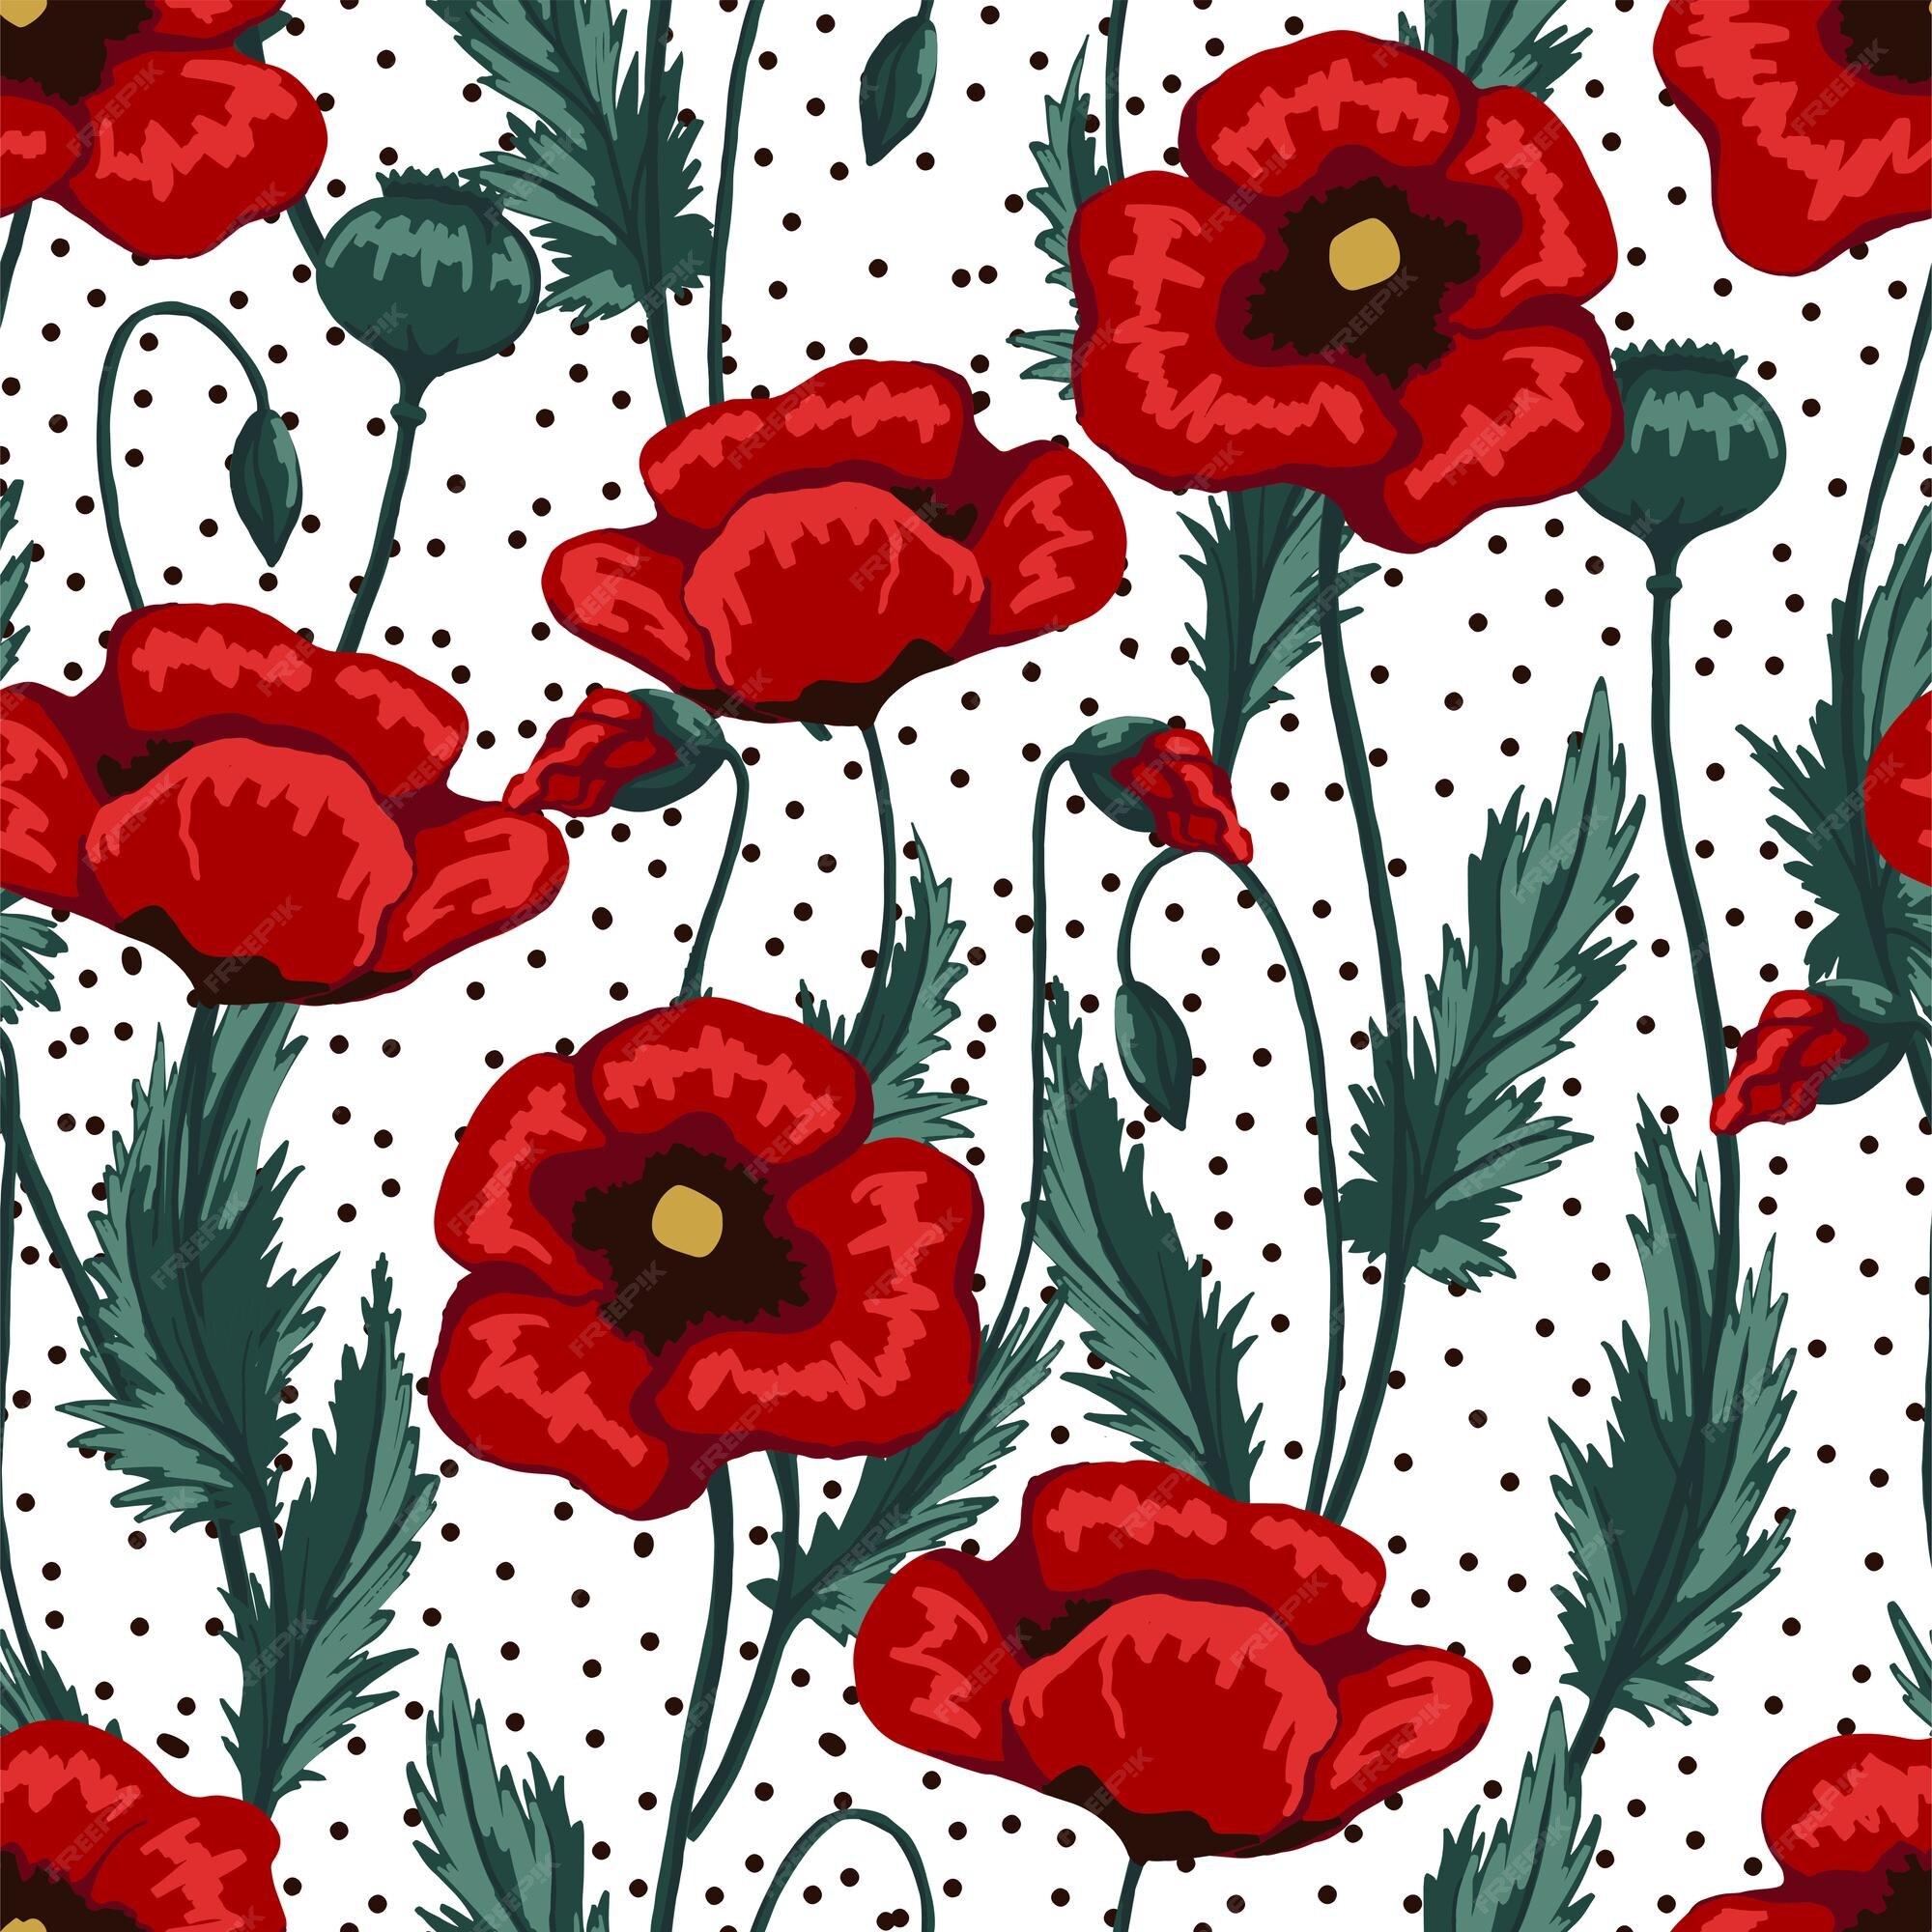 Premium Vector | Poppy plants seamless pattern. abstract vector floral  illustration. wildflowers ornament. vintage design for print, background,  textile, wallpaper, decor.